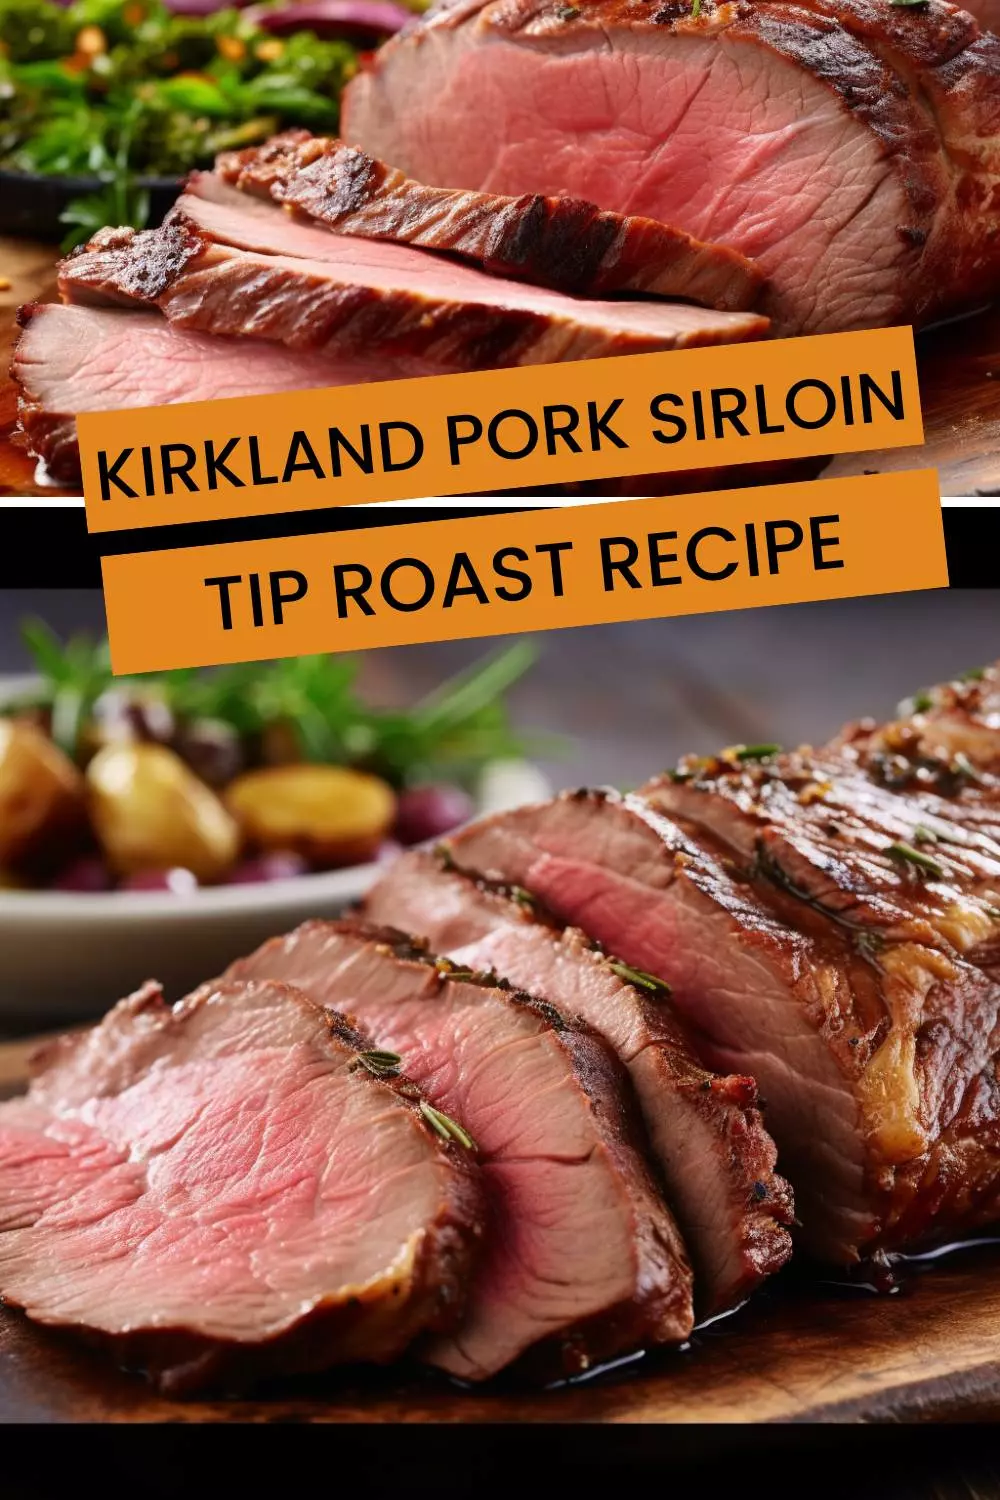 Kirkland pork sirloin tip roast is a delicious and tender cut of meat that is perfect for any occasion. This flavorful roast is available at Costco stores and can easily serve a large group of people, making it a great choice for family gatherings or holiday dinners. With its simple yet tasty marinade and easy cooking process, this recipe will quickly become a go-to in your household. Whether you are a seasoned chef or just starting out in the kitchen, this Kirkland pork sirloin tip roast is sure to impress your loved ones and leave them wanting more. What is Kirkland Pork Sirloin Tip Roast? Kirkland pork sirloin tip roast is a cut of pork that comes from the sirloin area of the pig. This cut is known for its tenderness and rich flavor, making it a popular choice for roasting. It is typically a boneless loin roast and can weigh anywhere between 3-5 pounds (1.4-2.3 kg). Kirkland, Costco's private label brand, offers high-quality pork sirloin tip roasts at an affordable price. This makes it a great option for those looking to serve a delicious and impressive meal without breaking the bank. With its marbling and natural flavor, this roast requires minimal seasoning and preparation, making it a convenient choice for any home cook. Why You'll Love this Kirkland Pork Sirloin Tip Roast? You'll love this Kirkland pork sirloin tip roast for its ease of preparation and mouth-watering flavor. With just a few simple ingredients, you can create a delicious and impressive dish that will have your guests raving. The marinade adds the perfect balance of savory and sweet flavors to complement the natural richness of the meat. Additionally, this roast is versatile and can be served with a variety of sides, making it perfect for any occasion. Whether you're hosting a dinner party or simply cooking for your family, this Kirkland pork sirloin tip roast is sure to be a hit every time. Ingredients Kirkland pork sirloin tip roast: This recipe calls for a 4 lb Kirkland pork sirloin tip roast which serves approximately 8-10 people. You can find this cut of pork at any Costco store. Organic Soy Sauce: This adds a rich umami flavor to the dish and helps tenderize the meat. Himalayan salt: A healthier alternative to table salt, it is full of minerals and adds a subtle yet distinct flavor. Garlic powder: This adds a delicious aroma and enhances the overall flavor of the dish. Bay leaves: These fragrant leaves add depth to the marinade and infuse the meat with a wonderful flavor. Black pepper: Adds a slight kick of spice and complements the other seasonings. Dried thyme: A staple herb in many recipes, it adds earthy and slightly floral notes to the dish. Onion: Adds a sweet and savory flavor profile to the marinade. Extra Virgin Olive Oil: This healthy oil helps keep the meat moist and adds a rich flavor. Water: The amount of water used will depend on the size of your roast. It is used for both marinating and cooking the roast. Kosher salt: This is used for seasoning the meat before cooking. It adds a nice crust and enhances the flavors of the dish. Step by Step Directions Step 1 Marinate the Pork Sirloin Tip Roast In a large bowl, mix together the soy sauce, Himalayan salt, garlic powder, bay leaves, black pepper, dried thyme, and onion. Slowly add in the extra virgin olive oil while whisking continuously to create an emulsion. Place the pork sirloin tip roast in a large resealable plastic bag or a shallow dish and pour the marinade over it. Massage the marinade into the meat, making sure it is fully coated. Seal the bag or cover the dish with plastic wrap and marinate in the refrigerator for at least 6 hours or overnight. The longer you marinate, the more flavorful your roast will be. Step 2 Prepare the Roast for Cooking Preheat your oven to 375°F (190°C). Remove the pork sirloin tip roast from the marinade and place it in a roasting pan. Discard any excess marinade. Sprinkle the Kosher salt over all sides of the roast, creating a nice crust. Pour water into the pan until it reaches about 1 inch (2.5 cm) up the sides of the roast. Step 3 Cook the Roast Cover the roasting pan with aluminum foil and place it in the oven. Cook for approximately 45 minutes, then remove the foil and continue cooking for an additional 15 minutes, or until the internal temperature reaches at least 145°F (63°C). Let the roast rest for 10 minutes before slicing and serving. Step 4 Serve and Enjoy! Slice the Kirkland pork sirloin tip roast against the grain into thin slices. Serve with your favorite sides. Tips Make sure to let the roast marinate for at least 6 hours or overnight to ensure maximum flavor. Use a meat thermometer to check the internal temperature of the roast. Overcooking can make it dry and tough. Letting the pork sirloin tip roast rest before slicing allows the juices to redistribute, resulting in a more tender and flavorful meat. For an extra kick of flavor, add some fresh herbs such as rosemary or thyme to the marinade. Nutrition Information How to store Kirkland Pork Sirloin Tip Roast? To store any leftover Kirkland pork sirloin tip roast, allow it to cool completely before placing it in an airtight container and refrigerating. It can be stored for up to 3 days in the refrigerator. If you have more leftovers than you can eat within 3 days, you can also freeze the cooked meat for later use. Simply wrap the slices or chunks of roast in plastic wrap or aluminum foil and place them in a freezer-safe bag or container. It can be stored for up to 3 months in the freezer. When ready to use, thaw the frozen meat in the refrigerator overnight before reheating. This will ensure that it stays moist and tender. You can reheat it by placing it in a preheated oven at 375°F (190°C) for about 10-15 minutes. Alternatively, you can also microwave it for a quicker option. What other substitute can I use in Kirkland Pork Sirloin Tip Roast? If you don't have access to all the ingredients listed in this recipe, don't worry! There are plenty of substitutes you can use to achieve a delicious and flavorful pork sirloin tip roast. Soy sauce: You can substitute soy sauce with Tamari or coconut aminos for a gluten-free option. If these are not available, you can also use Worcestershire sauce or balsamic vinegar mixed with a little water. Himalayan salt: You can use any other type of salt, such as sea salt or table salt, in place of Himalayan salt. Just be sure to adjust the amount according to your taste preference. Garlic powder: Fresh minced garlic can be used instead of garlic powder for a stronger flavor. Bay leaves: If you don't have dried bay leaves, you can use fresh ones or substitute them with a pinch of thyme or oregano. Dried thyme: As mentioned above, you can use other herbs such as rosemary or oregano in place of thyme if needed. Onion: You can substitute onion with shallots, scallions, or leeks for a similar flavor. Extra Virgin Olive Oil: If you don't have extra virgin olive oil, you can use any other type of cooking oil, such as vegetable or canola oil. You can also use melted butter for a richer flavor. Water: Chicken broth or beef broth can be used in place of water for added depth of flavor. Kosher salt: Any other type of salt can be used, but it's important to use a coarse kosher or sea salt for the best crust. How to use leftovers from Kirkland Pork Sirloin Tip Roast? Leftover pork sirloin tip roast is incredibly versatile and can be used in various dishes for quick and easy meals. Shredded pork sandwiches: Use leftover pork to make pulled pork sandwiches. Simply shred the meat and mix with your favorite BBQ sauce or make a quick homemade version using ketchup, Worcestershire sauce, brown sugar, and spices. Pork tacos: Use leftover pork as a filling for tacos. Just heat it up in a pan with some taco seasoning and serve in tortillas with your desired toppings. Fried rice: Dice up the leftover pork and use it to make delicious fried rice. Add in some diced vegetables, scrambled eggs, and soy sauce for a quick and easy meal. Pork stir-fry: Slice up the leftover pork and use it in a stir-fry with your favorite veggies and sauce. FAQs Why Marinate a Pork Sirloin Tip Roast? Marinating your pork sirloin tip roast not only adds flavor but also helps to tenderize the meat. The acidic components in the marinade (such as soy sauce and vinegar) break down tough muscle fibers, resulting in a more tender and juicy roast. Additionally, marinating allows for the flavors to infuse into the meat, resulting in a more flavorful end result. Why is it Important to Let the Pork Sirloin Tip Roast Rest Before Slicing? Letting the pork sirloin tip roast rest before slicing allows for the juices to redistribute evenly throughout the meat. If you cut into it immediately after cooking, the juices will pool and make your meat dry. Allowing it to rest for at least 10 minutes will result in a more tender and flavorful roast. What Should I Serve with Kirkland Pork Sirloin Tip Roast? The options are endless when it comes to what to serve with your pork sirloin tip roast. Some popular choices include roasted or mashed potatoes, steamed vegetables, a fresh salad, or even some crusty bread to soak up the juices. You can also pair it with your favorite sauces or gravies for added flavor. Can I Use a Slow Cooker to Cook Kirkland Pork Sirloin Tip Roast? Yes, you can definitely use a slow cooker to cook this pork sirloin tip roast. Simply follow the instructions for marinating and searing the meat, then place it in your slow cooker with any additional ingredients or sauces. Cook on low for 6-8 hours or on high for 3-4 hours until tender. How Can I Tell When the Pork Sirloin Tip Roast is Done? The best way to ensure that your pork sirloin tip roast is cooked to the right internal temperature is by using a meat thermometer. The USDA recommends cooking pork to an internal temperature of 145°F (63°C) for medium-rare and 160°F (71°C) for medium, with a 3-minute rest time after removing from heat. Conclusion Thank you for reading this article about Kirkland Pork Sirloin Tip Roast! We hope you found it informative and helpful. Remember to always marinate your pork sirloin tip roast for maximum flavor and tenderness. kirkland pork sirloin tip roast recipe